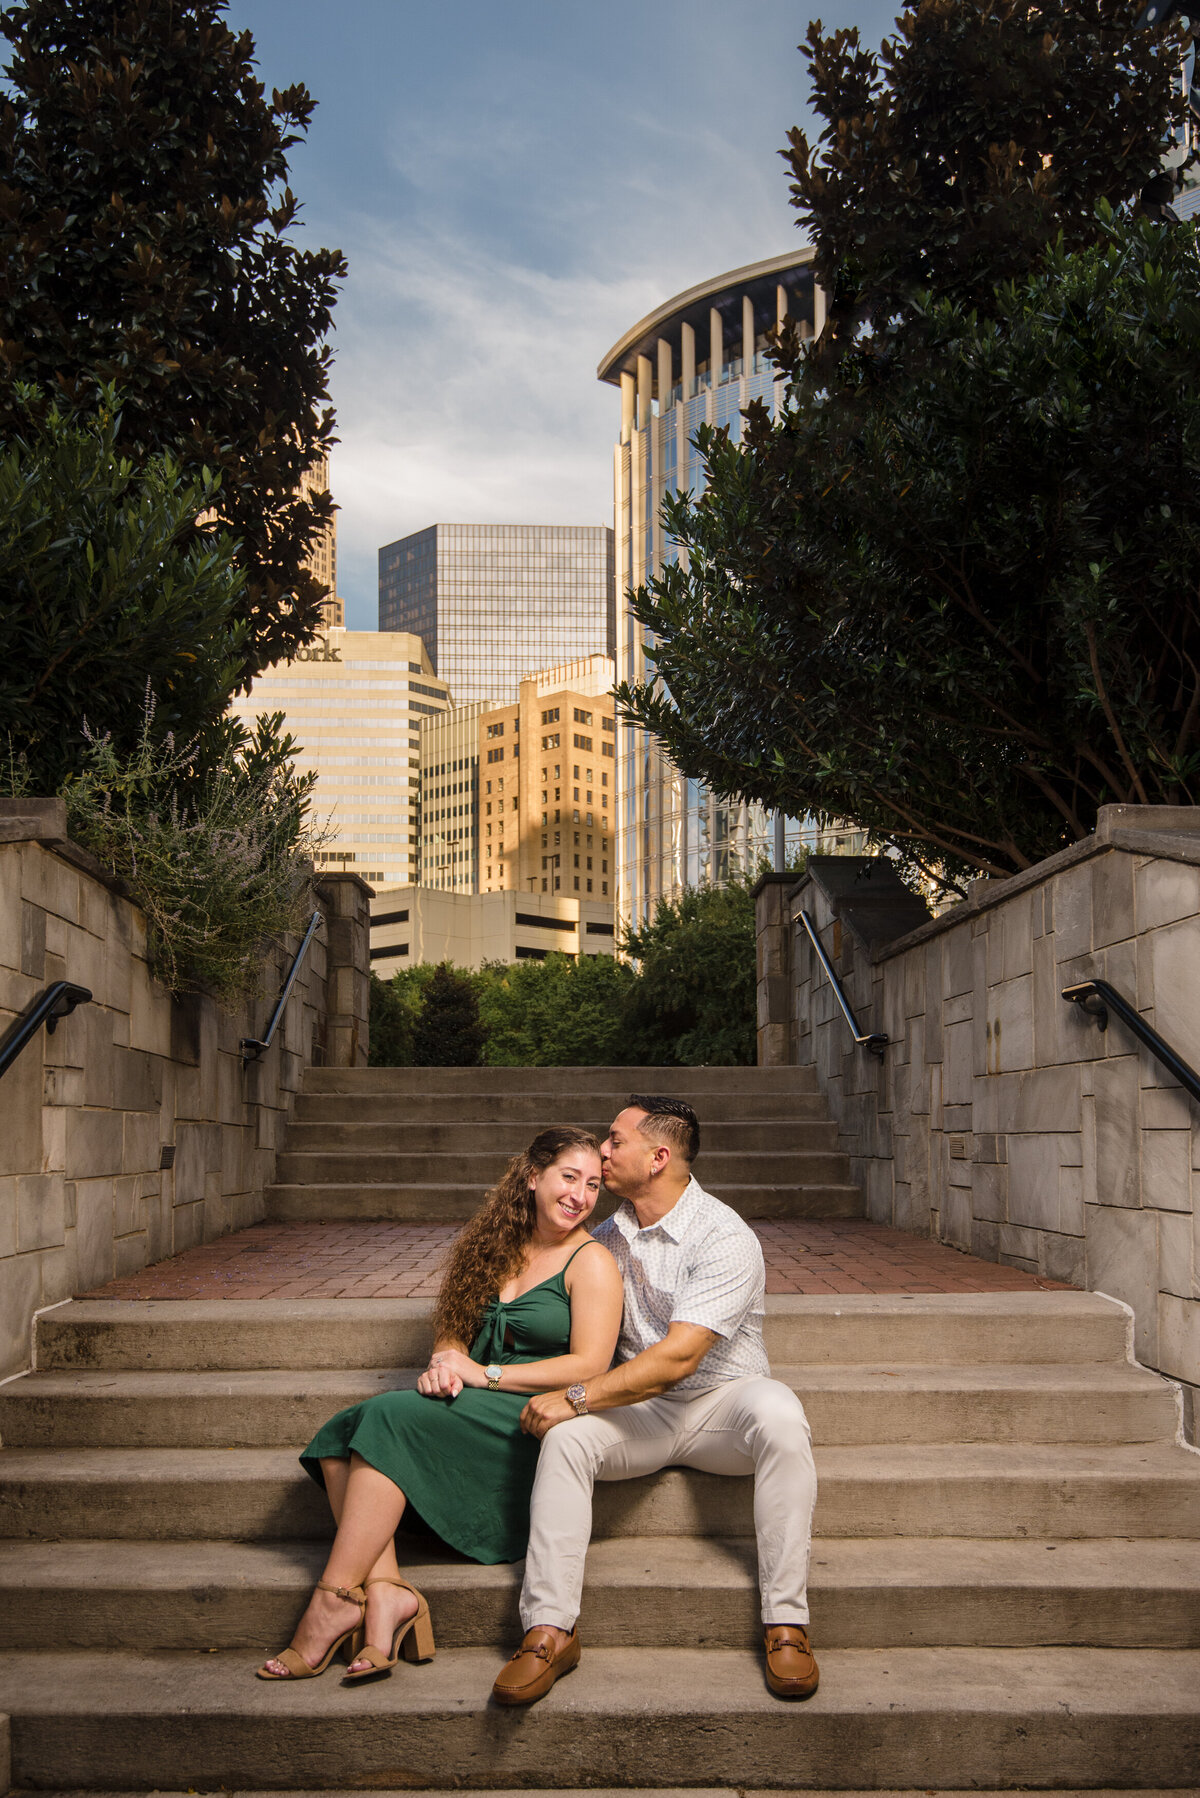 A-couple-seated-on-the-steps-in-Romare-Bearden-park-the-man-kissing-the-woman-on-her-temple-as-she-smiles-and-looks-at-the-camera-with-Charlotte-city-buildings-in-the-background